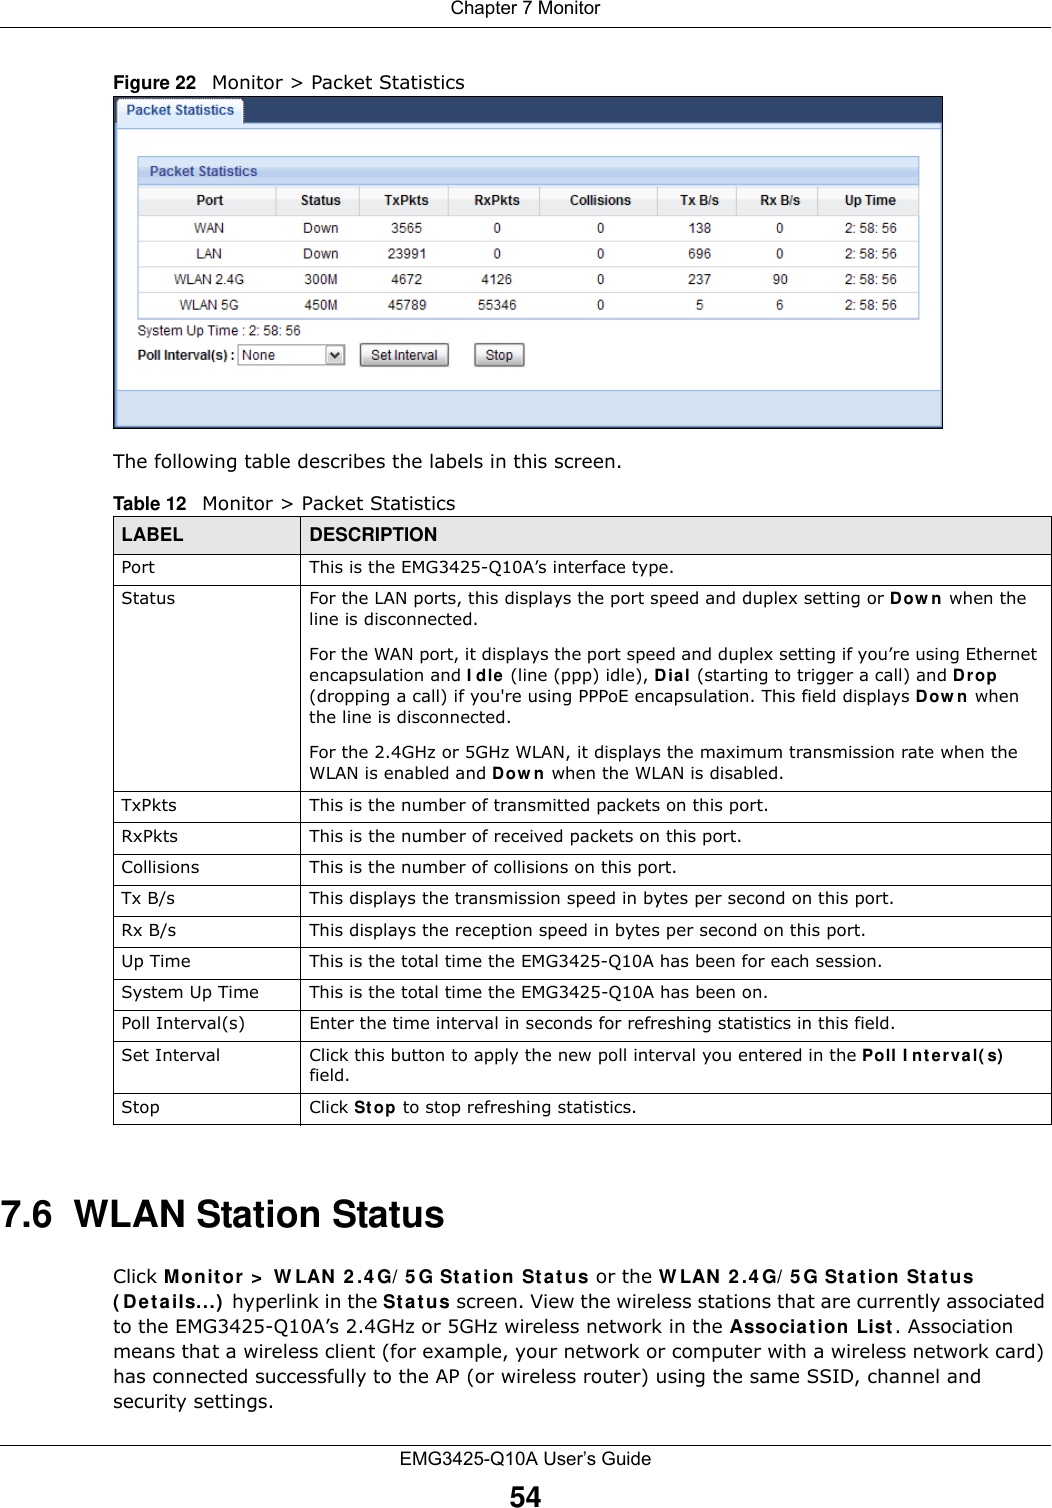 Chapter 7 MonitorEMG3425-Q10A User’s Guide54Figure 22   Monitor &gt; Packet Statistics The following table describes the labels in this screen.7.6  WLAN Station Status     Click M onit or &gt;  W LAN 2 .4 G/ 5 G St a t ion St at us or the W LAN  2 .4 G/ 5 G St at ion St a t us ( D e t ails. ..)  hyperlink in the St a t us screen. View the wireless stations that are currently associated to the EMG3425-Q10A’s 2.4GHz or 5GHz wireless network in the Association List. Association means that a wireless client (for example, your network or computer with a wireless network card) has connected successfully to the AP (or wireless router) using the same SSID, channel and security settings.Table 12   Monitor &gt; Packet StatisticsLABEL DESCRIPTIONPort This is the EMG3425-Q10A’s interface type.Status  For the LAN ports, this displays the port speed and duplex setting or Dow n  when the line is disconnected.For the WAN port, it displays the port speed and duplex setting if you’re using Ethernet encapsulation and I dle (line (ppp) idle), Dial (starting to trigger a call) and Drop (dropping a call) if you&apos;re using PPPoE encapsulation. This field displays Dow n when the line is disconnected.For the 2.4GHz or 5GHz WLAN, it displays the maximum transmission rate when the WLAN is enabled and D ow n when the WLAN is disabled.TxPkts  This is the number of transmitted packets on this port.RxPkts  This is the number of received packets on this port.Collisions  This is the number of collisions on this port.Tx B/s  This displays the transmission speed in bytes per second on this port.Rx B/s This displays the reception speed in bytes per second on this port.Up Time This is the total time the EMG3425-Q10A has been for each session.System Up Time This is the total time the EMG3425-Q10A has been on.Poll Interval(s) Enter the time interval in seconds for refreshing statistics in this field.Set Interval Click this button to apply the new poll interval you entered in the Poll I nt erva l( s)  field.Stop Click St op to stop refreshing statistics.